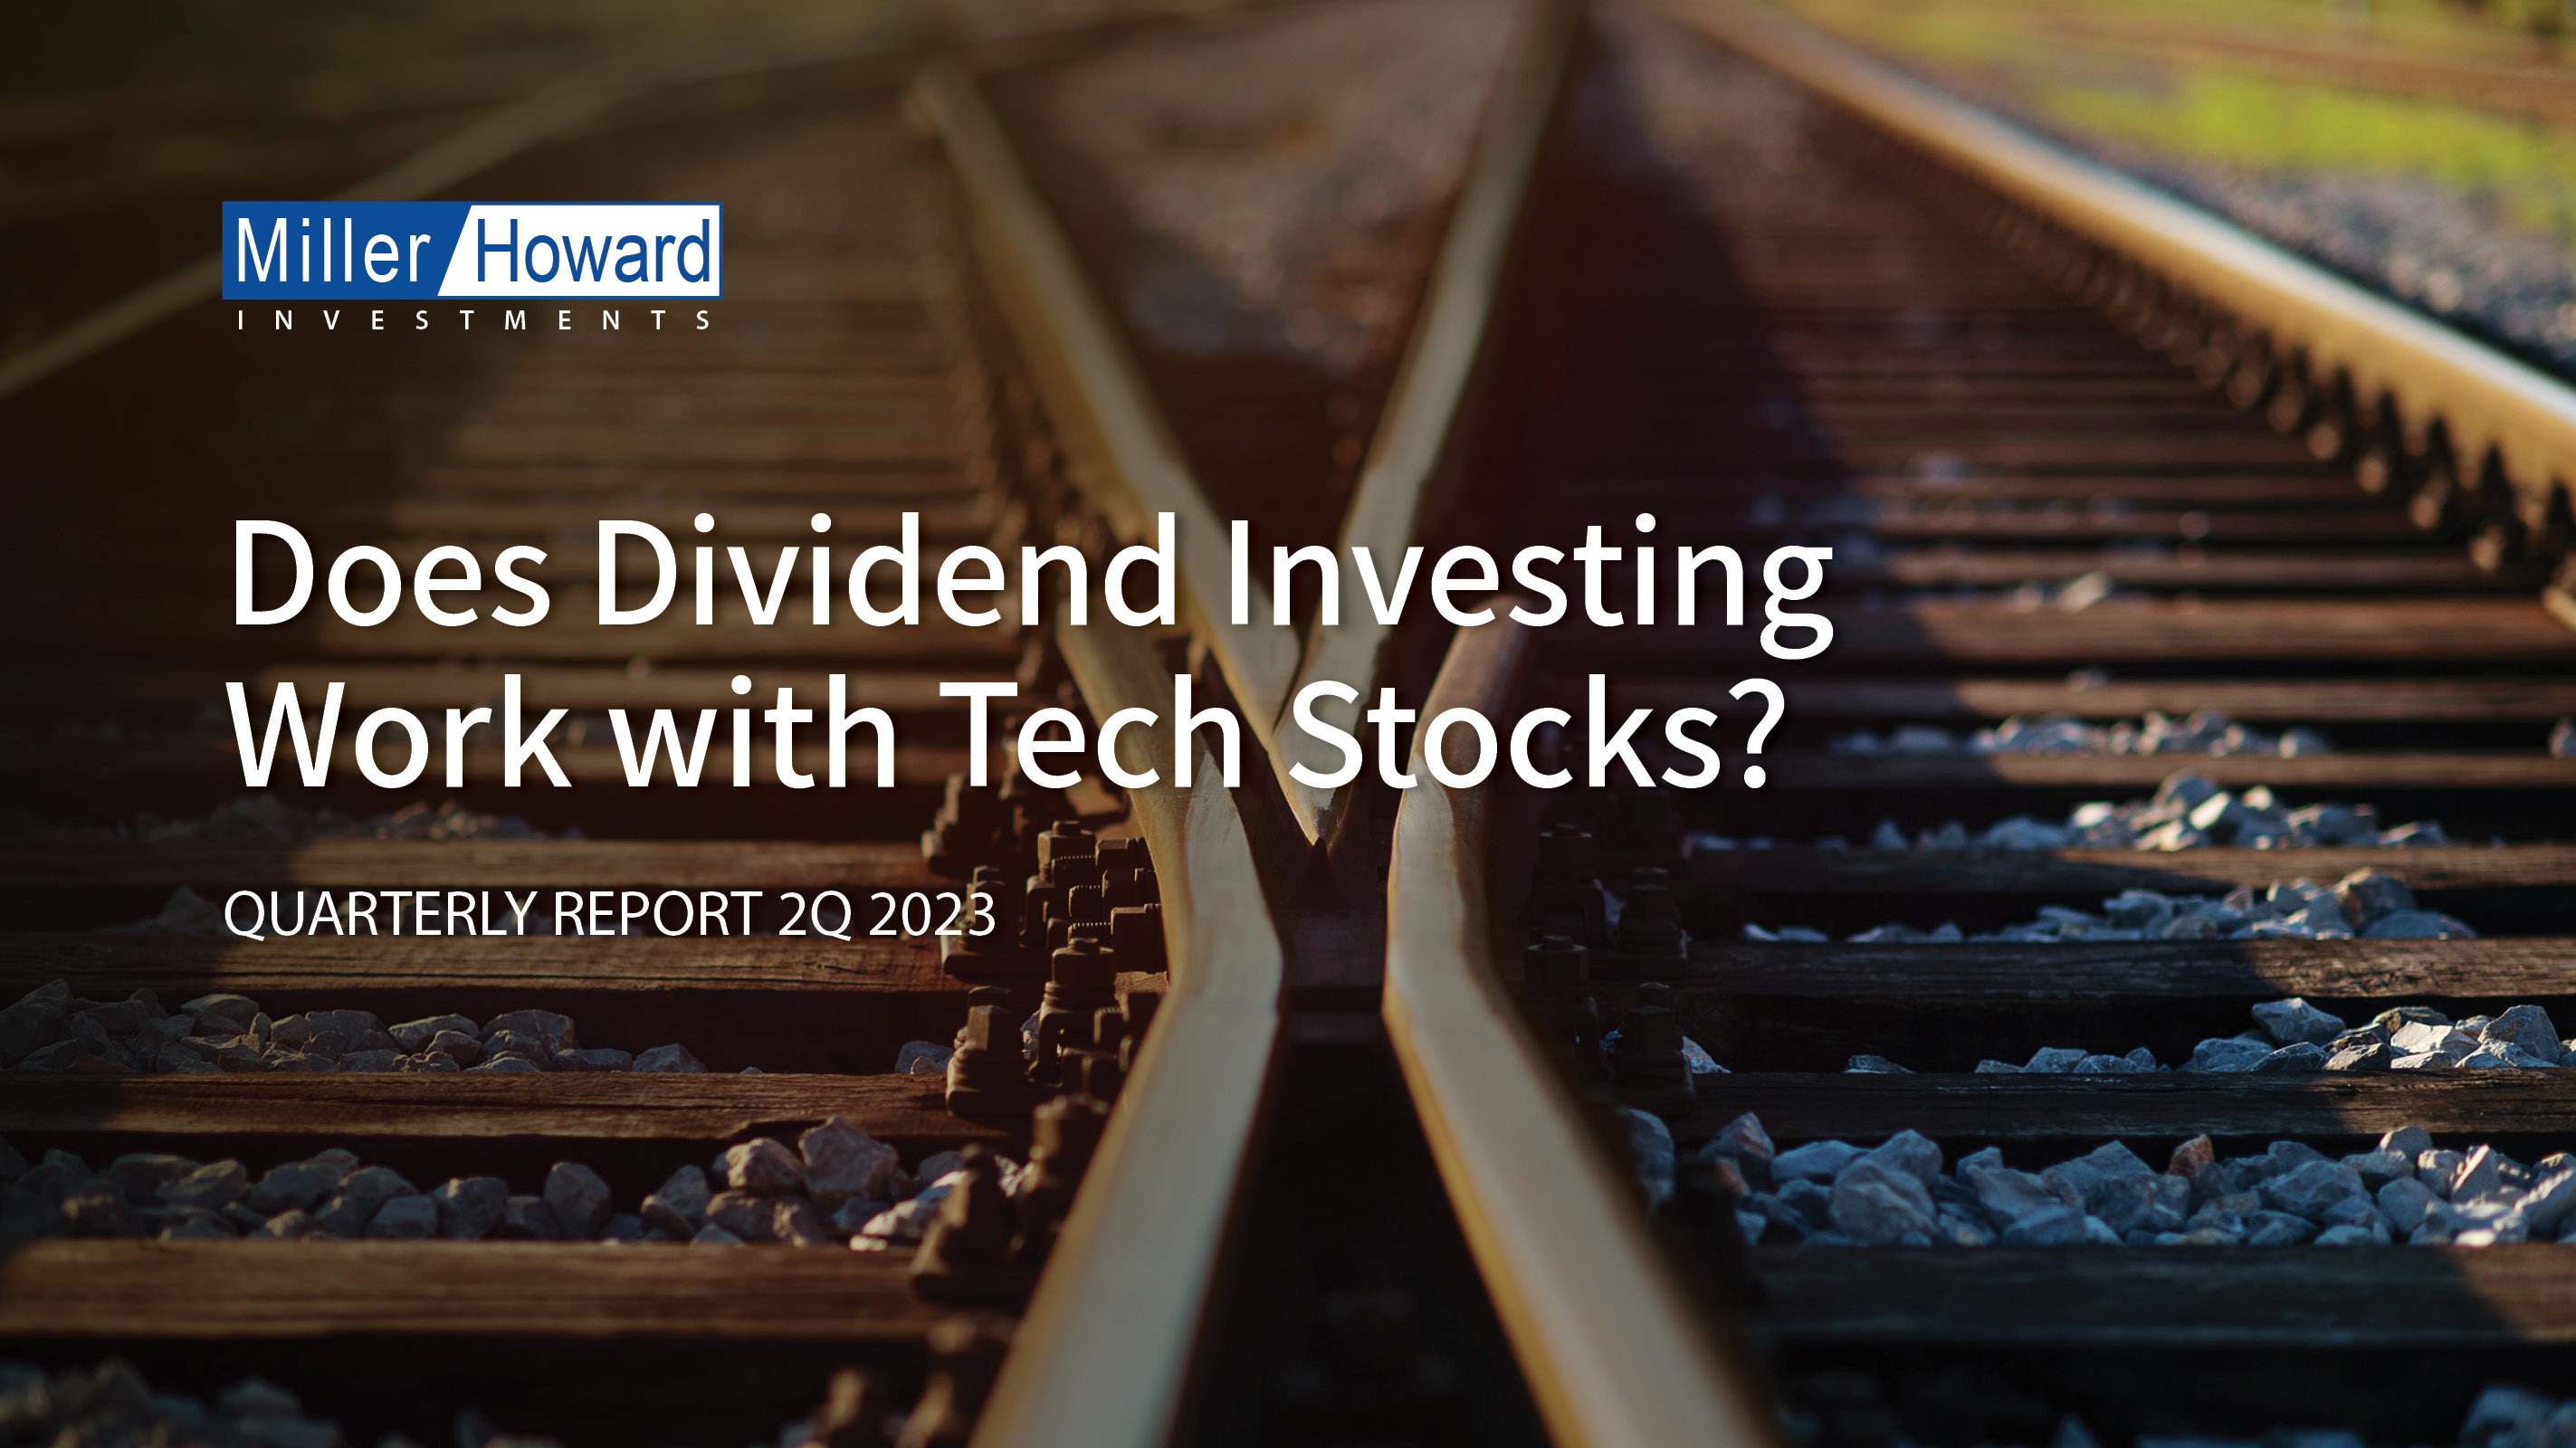 Quarterly Report 2023 Q2 - Does Dividend Investing Work with Tech Stocks?